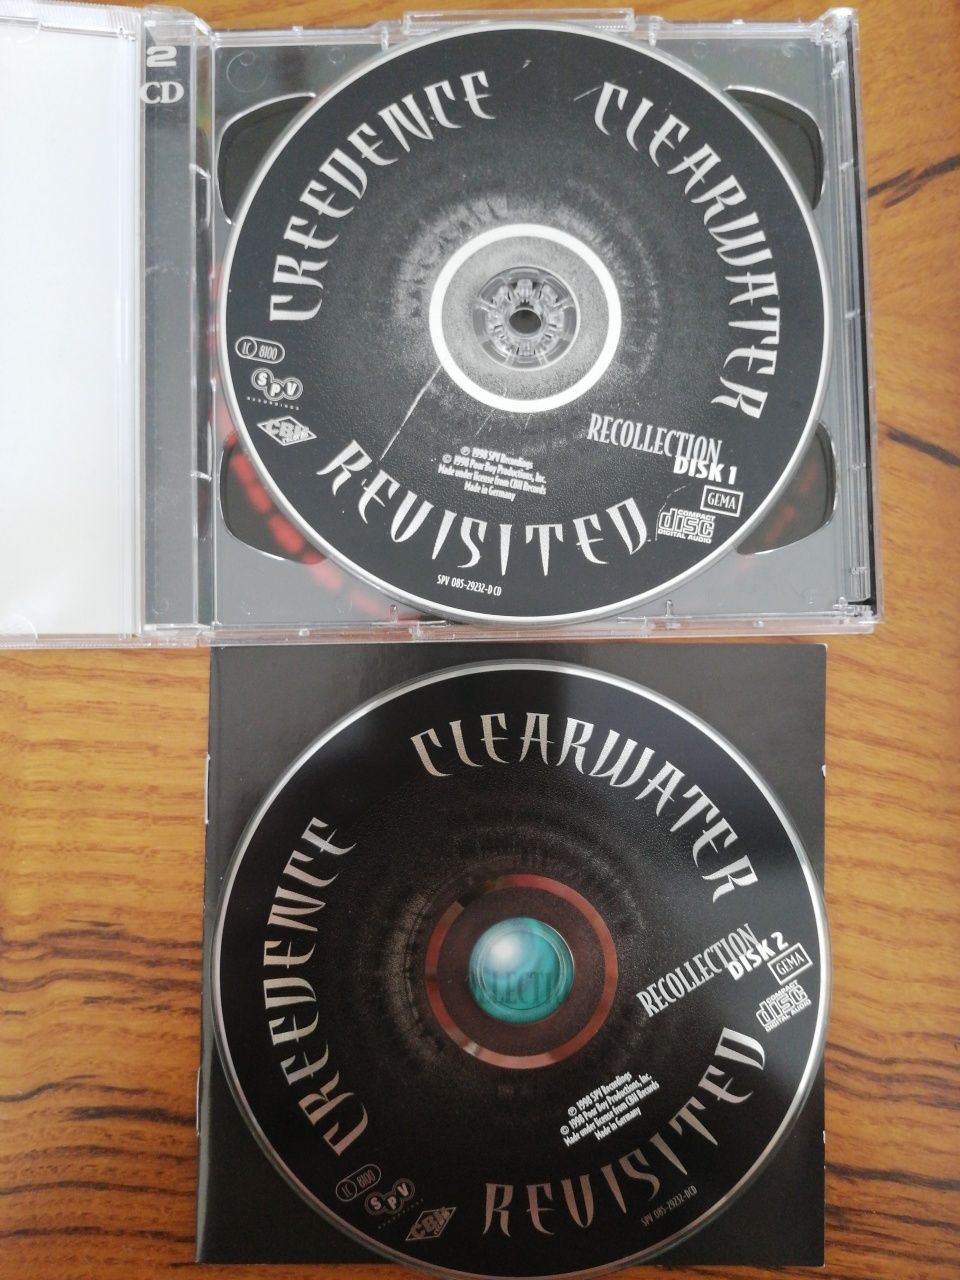 CD Creedence clearwater revisited